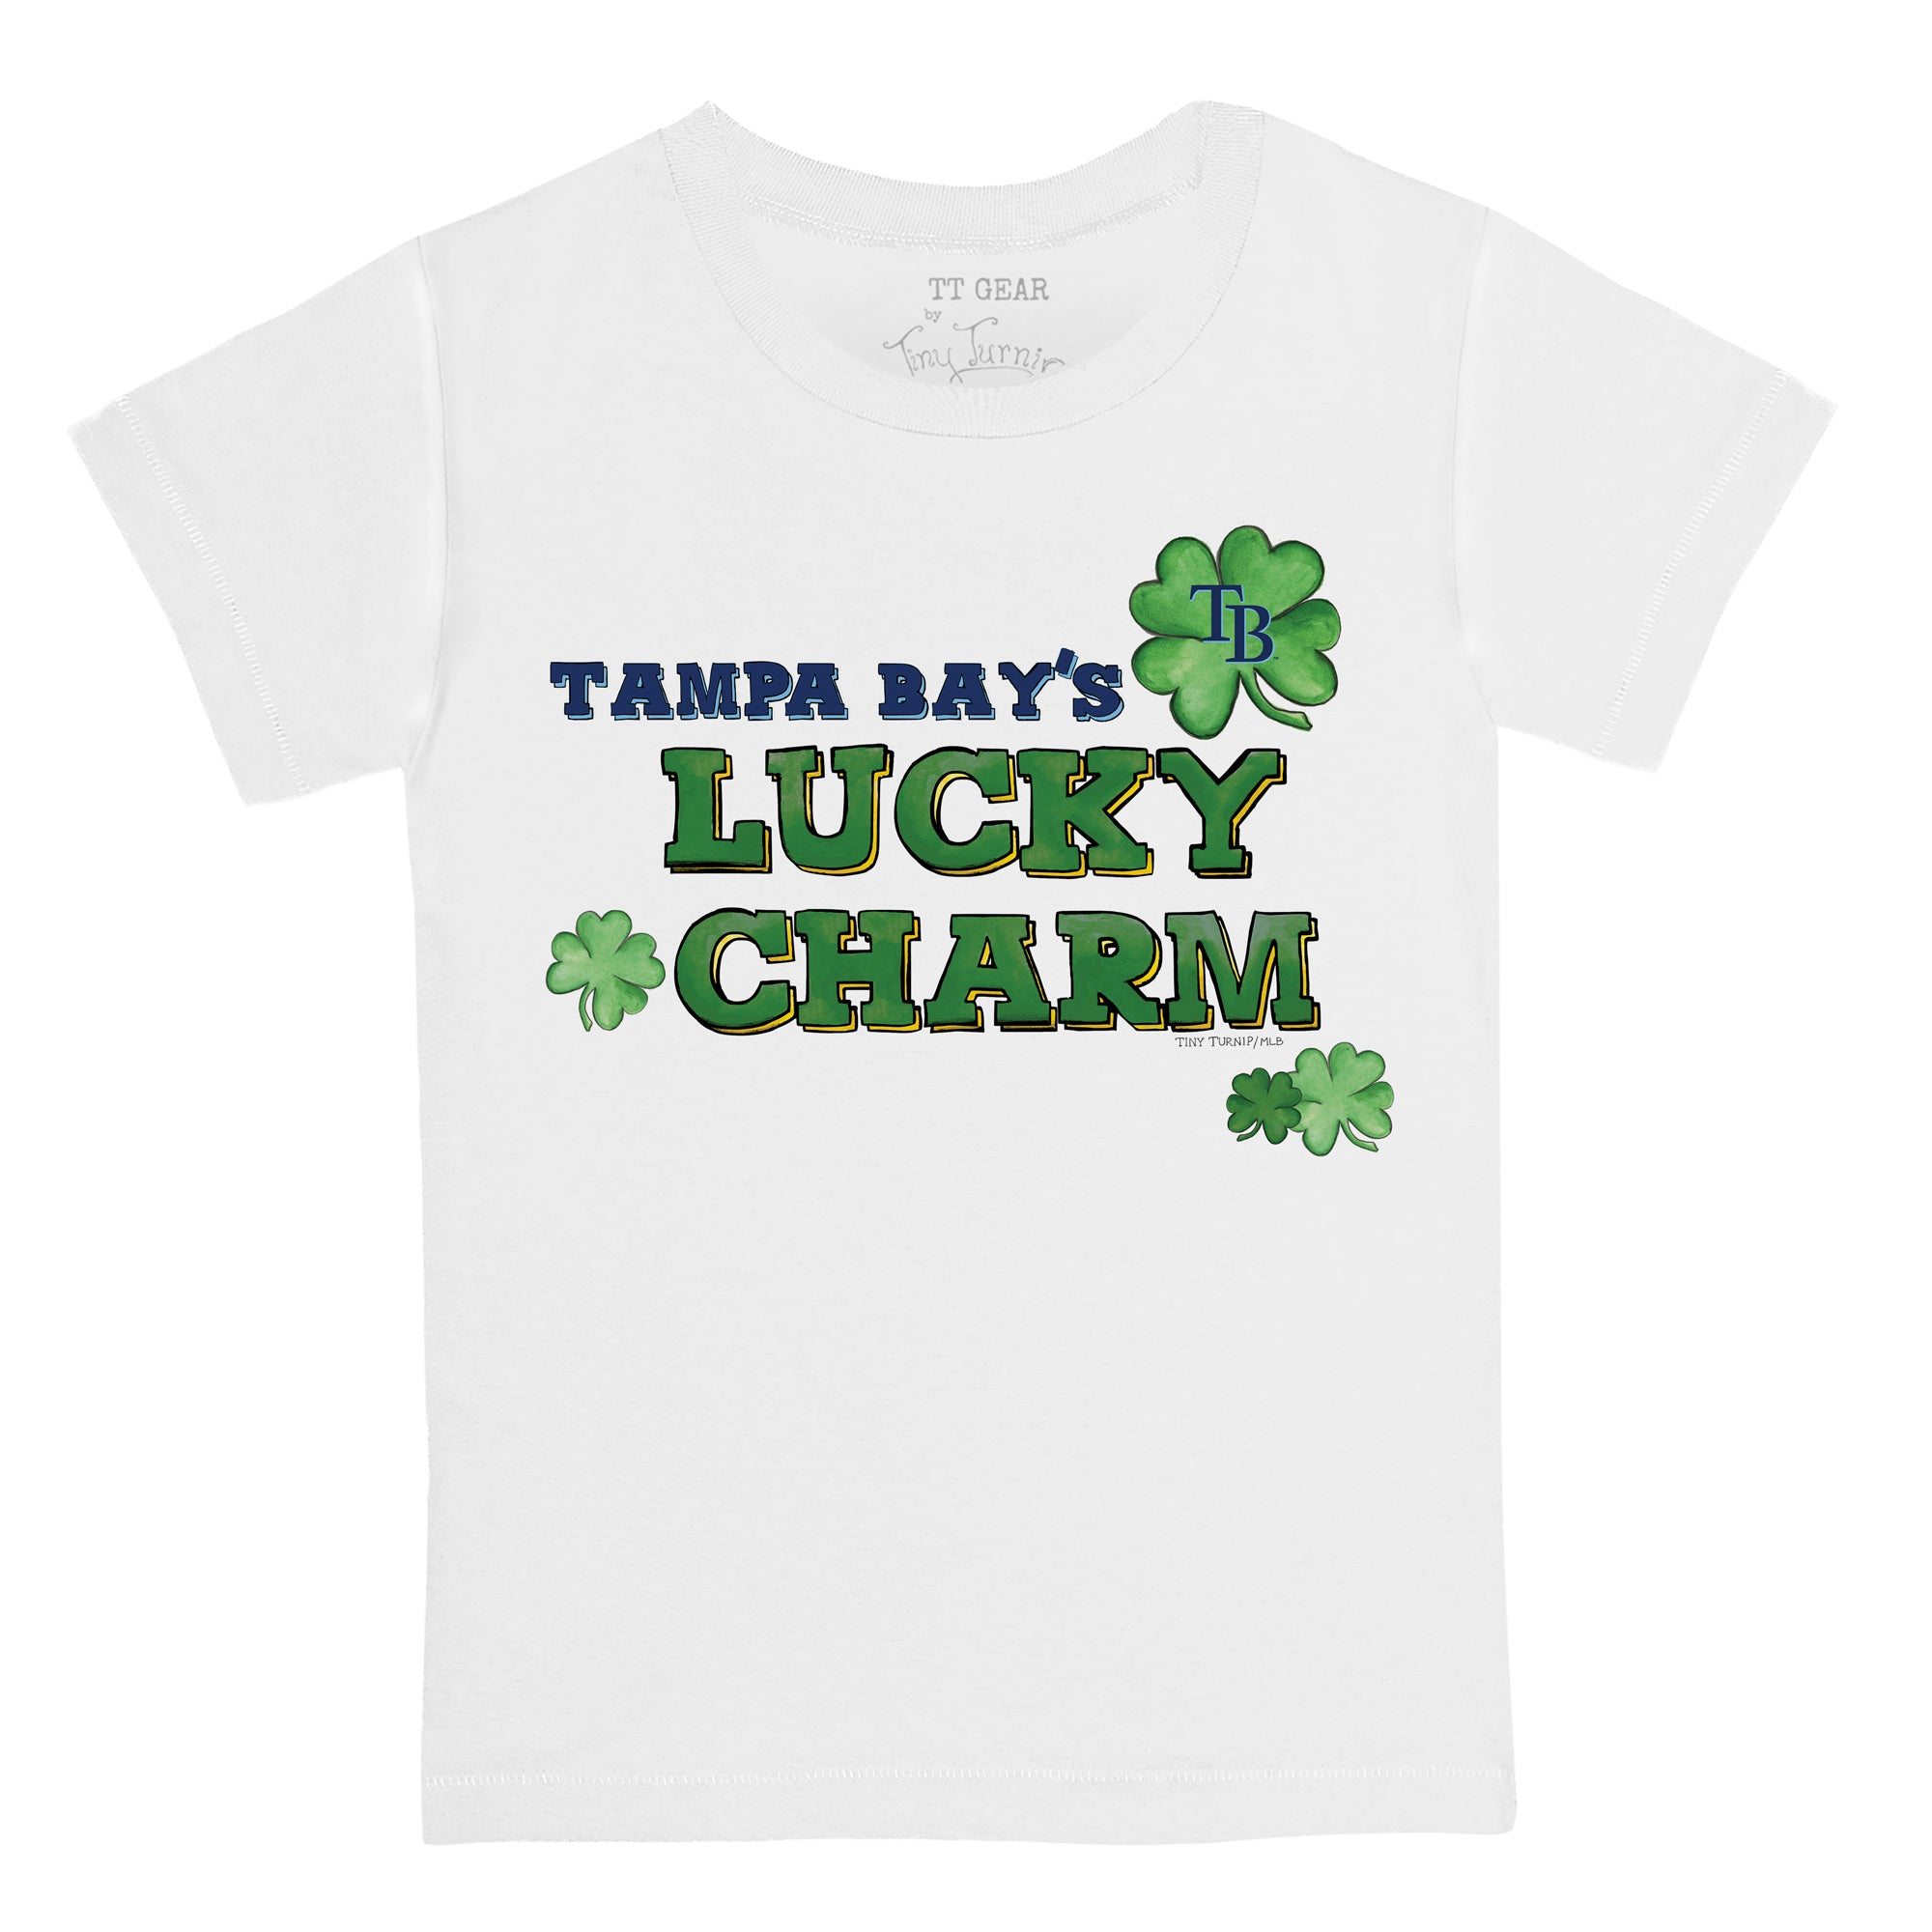 Tampa Bay Rays Tiny Turnip Youth State Outline T-Shirt - White